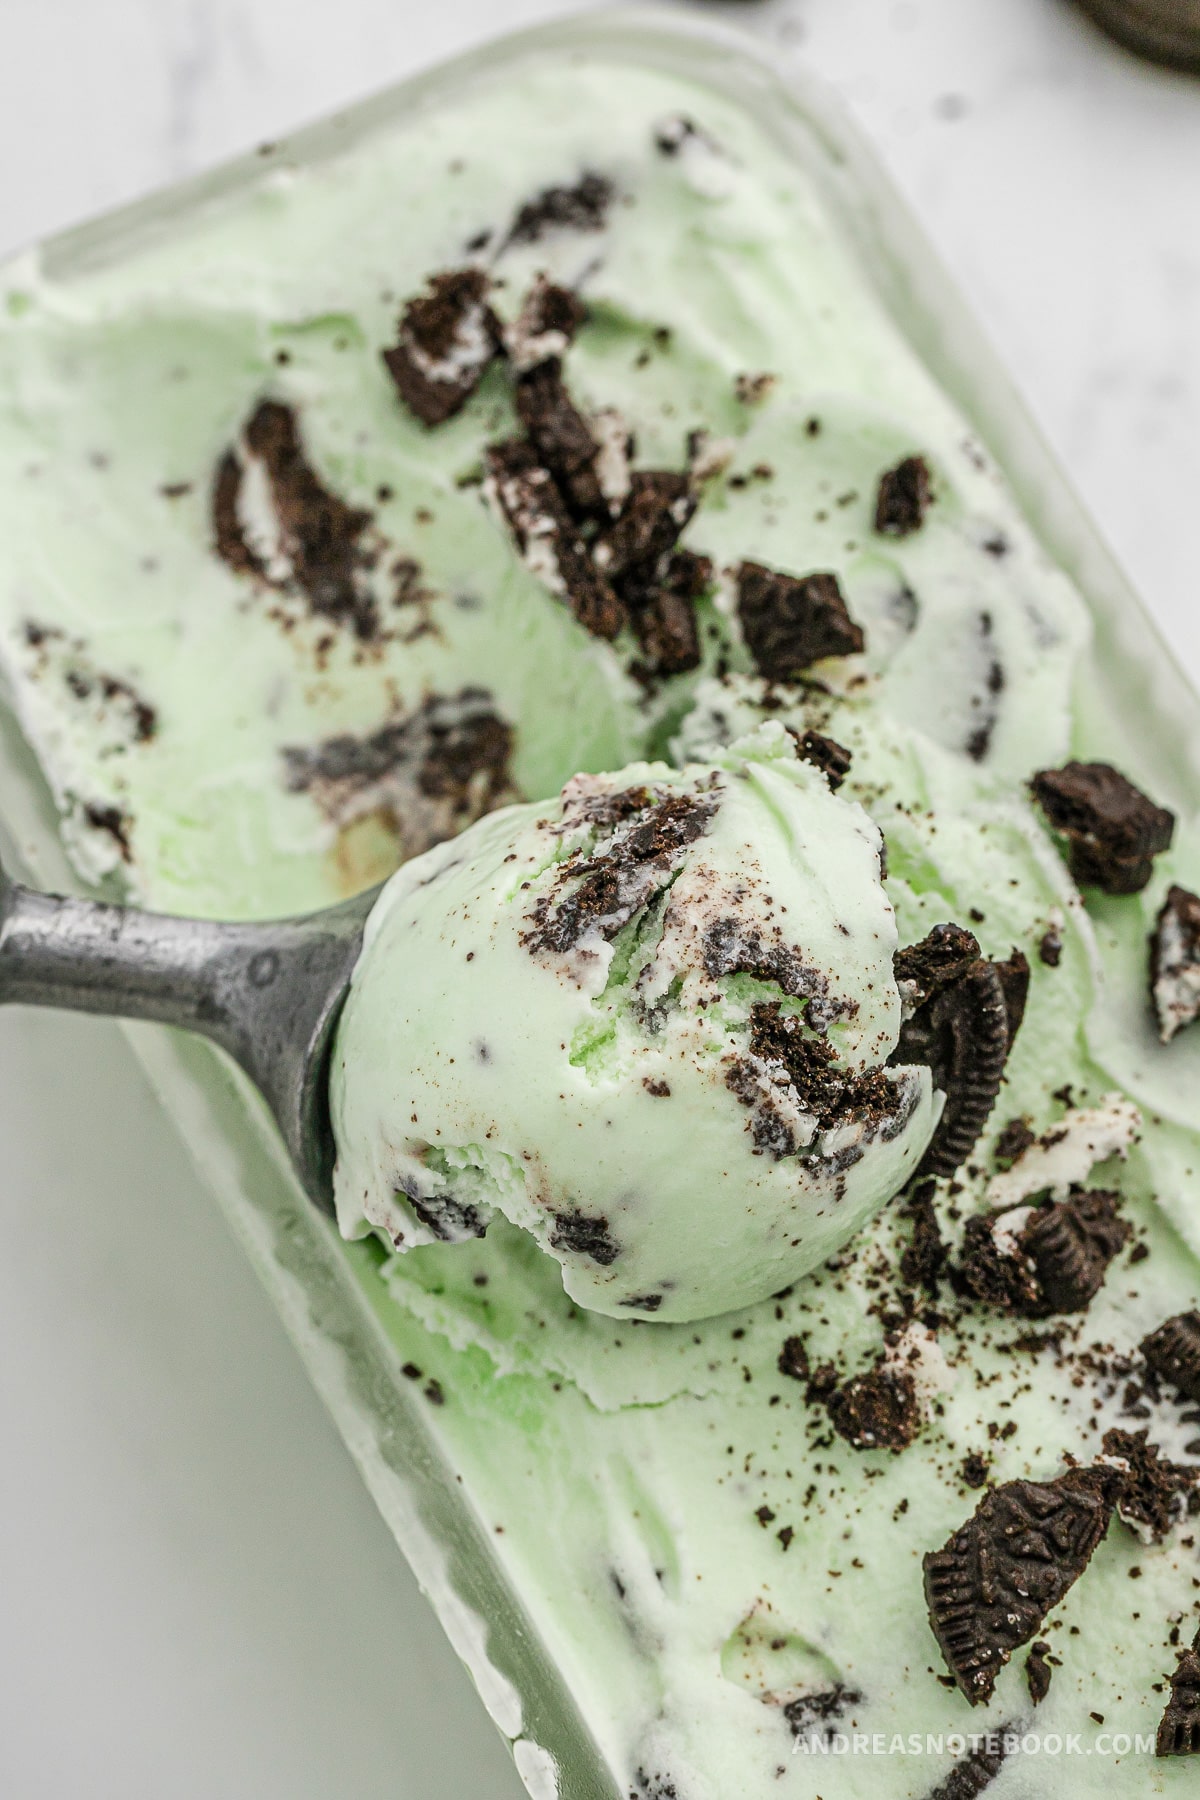 Ice cream scoop scooping out mint cookie ice cream.